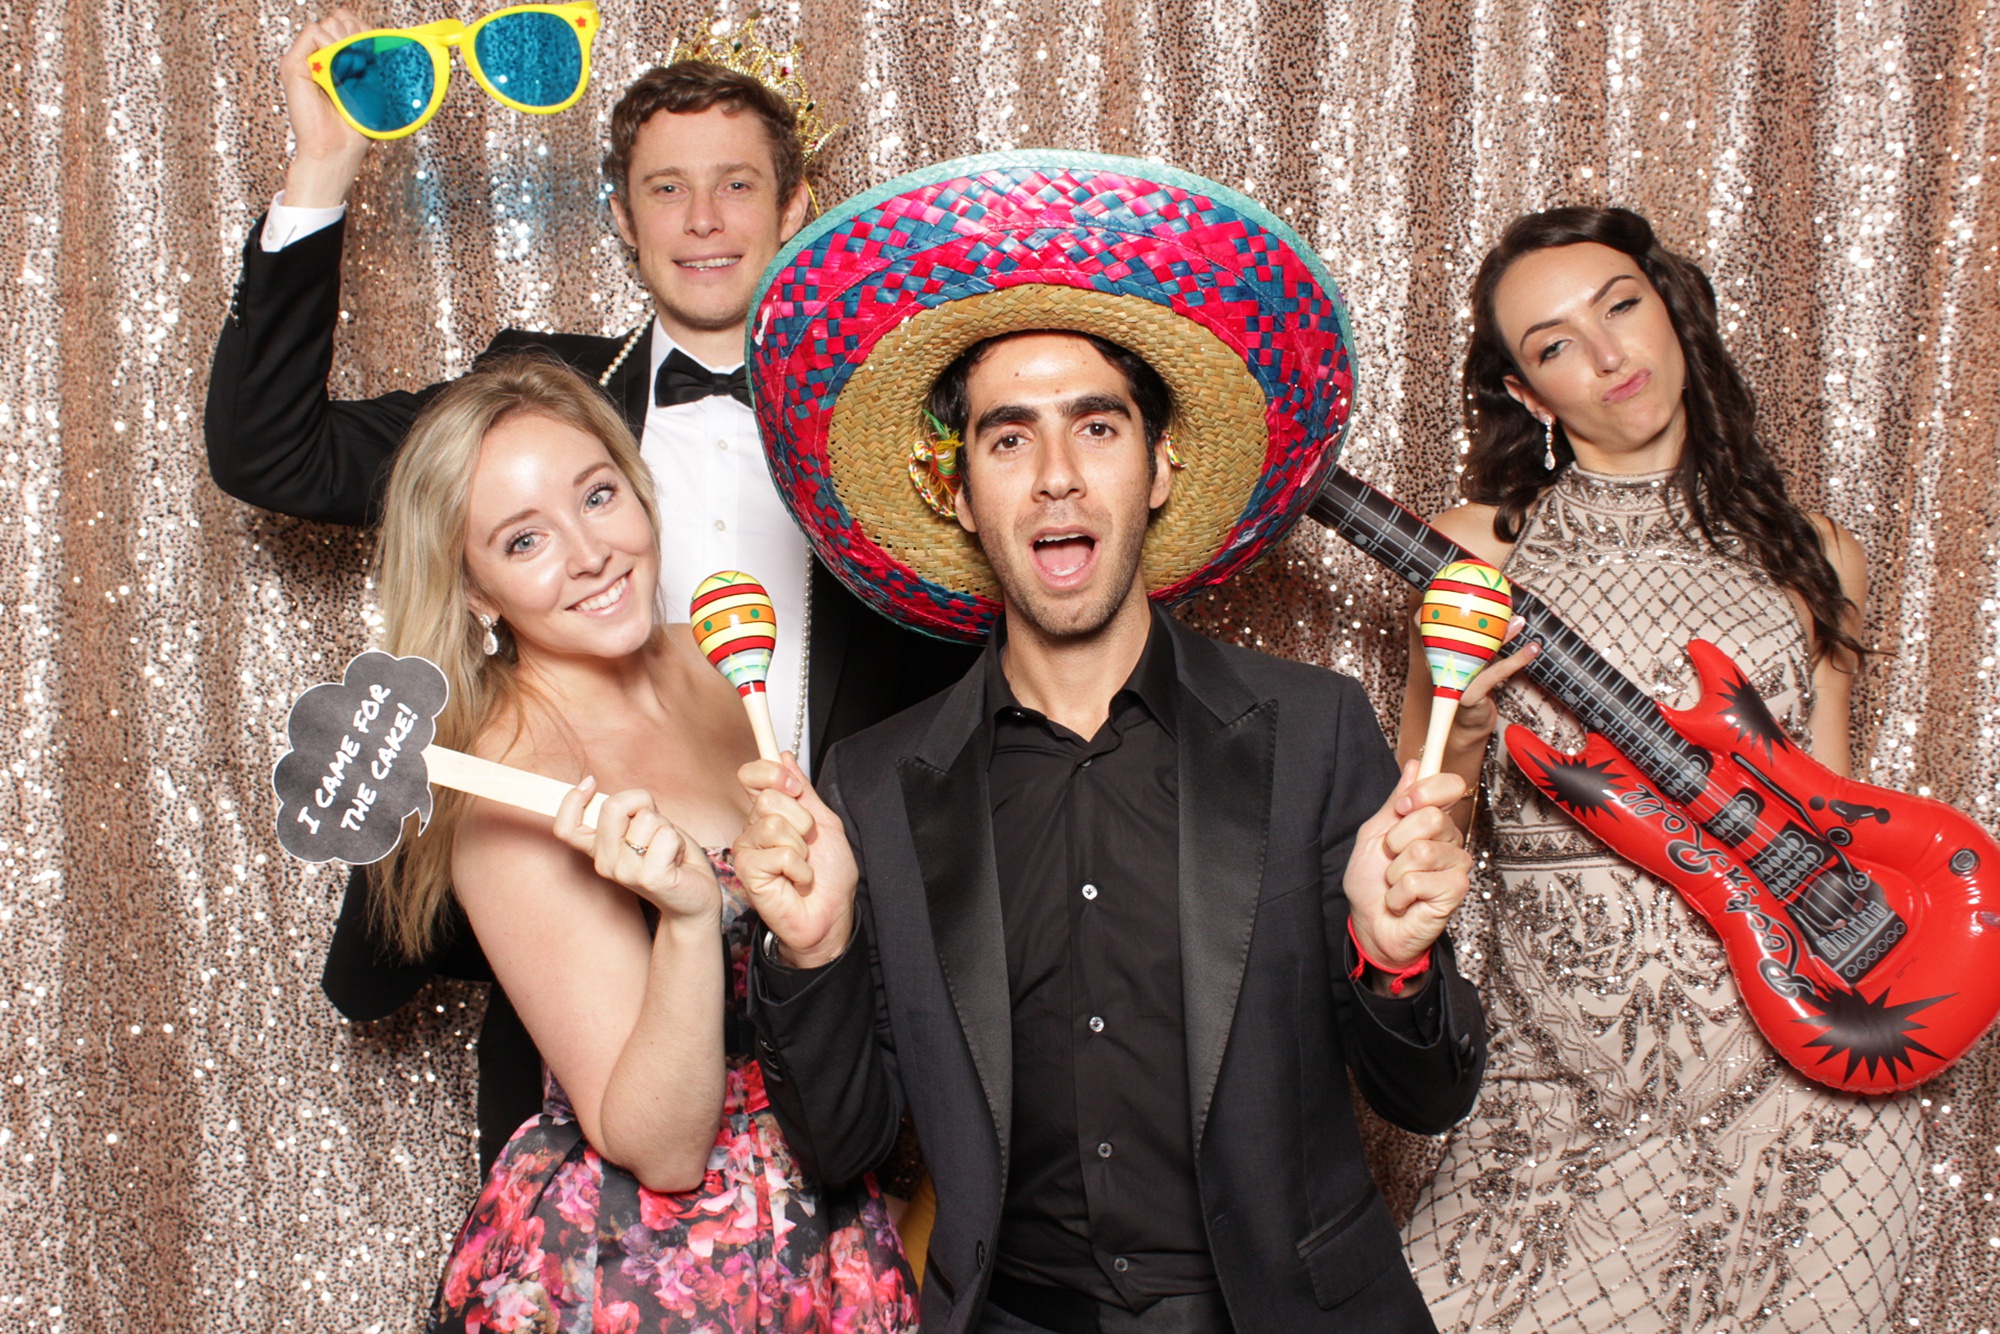 Park Chateau Estate Photo Booth fun with sombreros and inflatable guitar